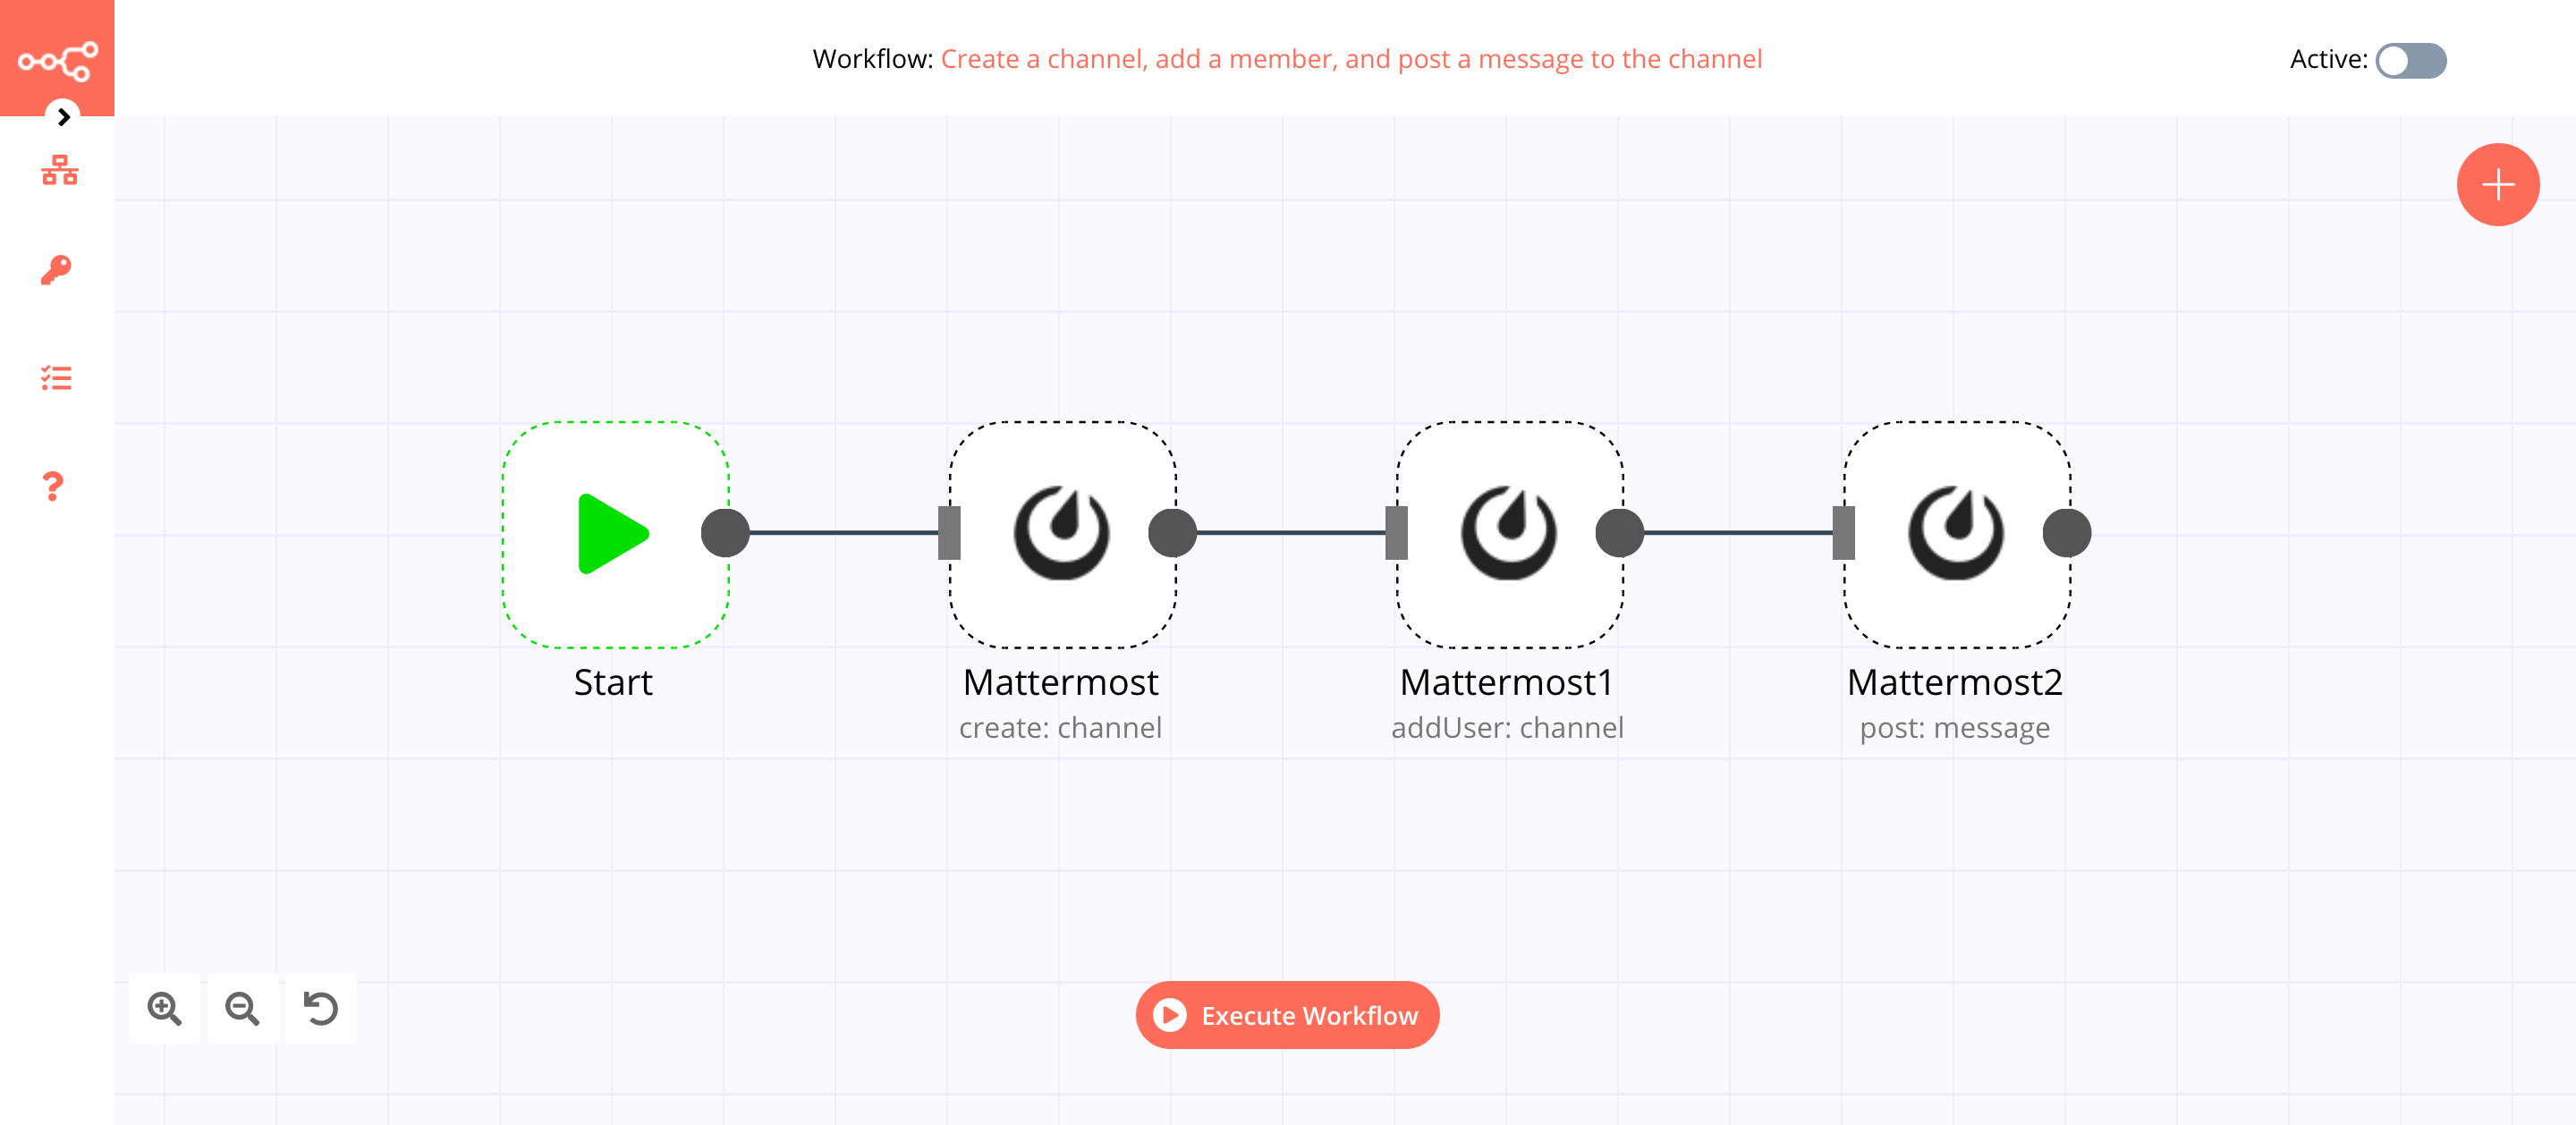 A workflow with the Mattermost node